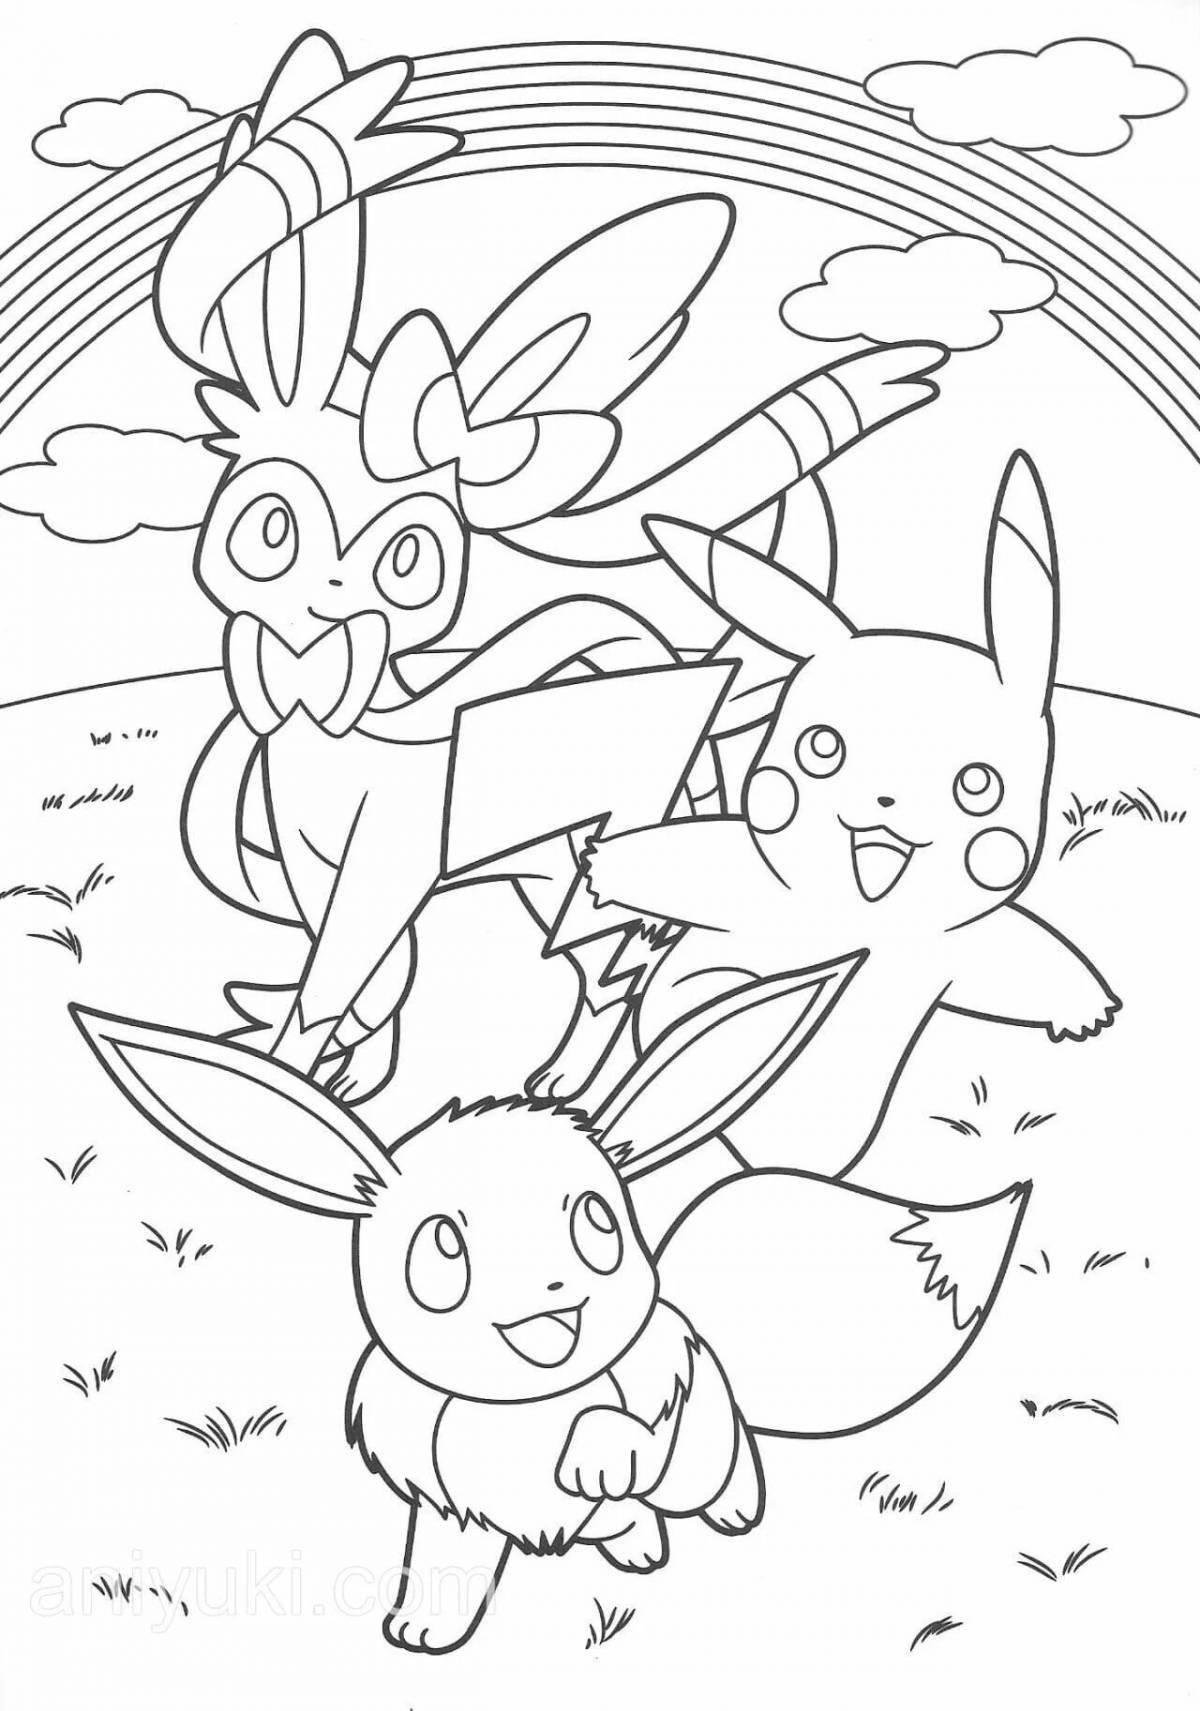 Eevee Charming Coloring Page